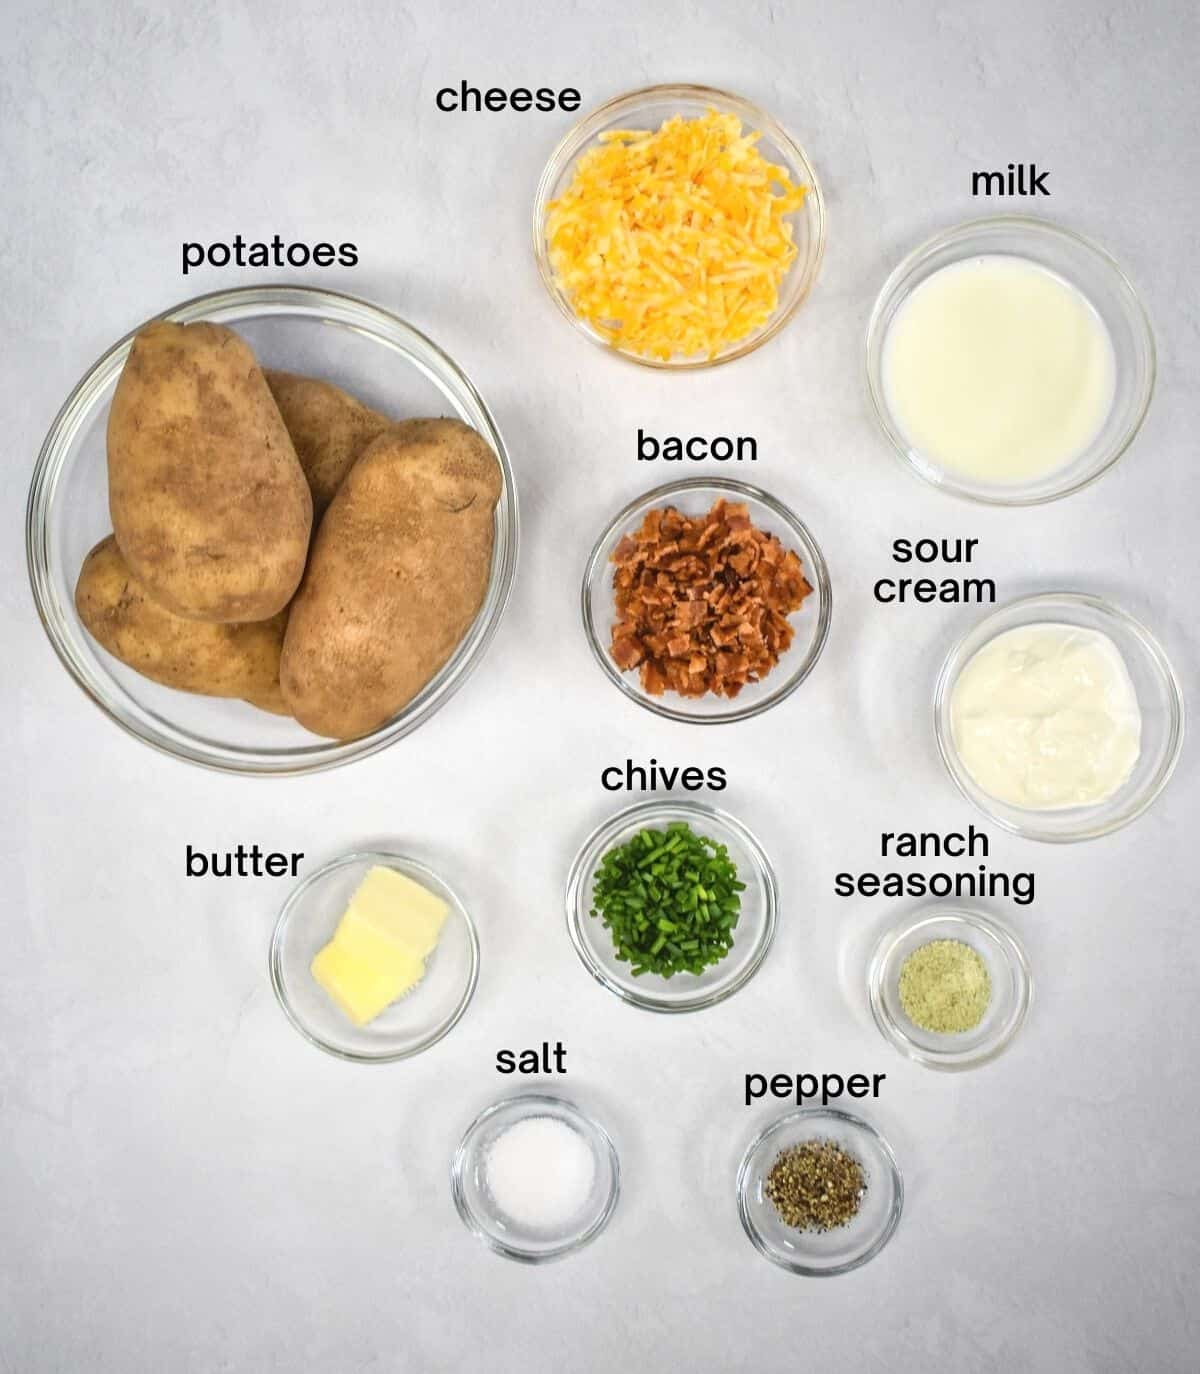 The ingredients labeled and arranged in glass bowls on a white table.